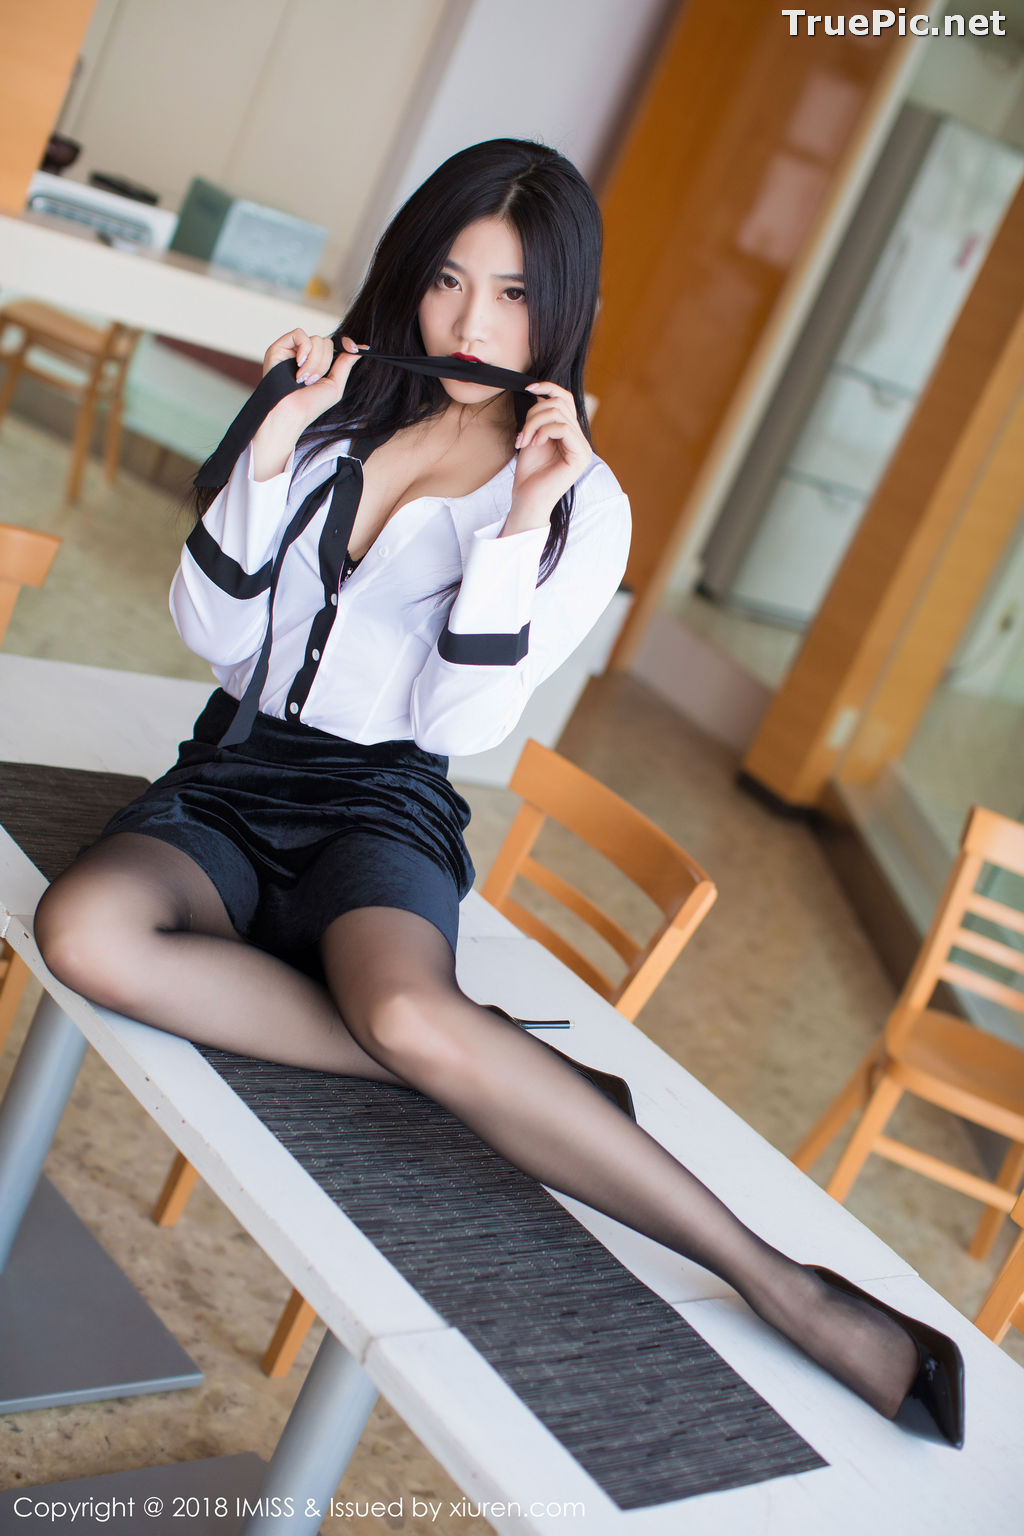 Image IMISS Vol.239 - Chinese Model - Sabrina (Xu Nuo 许诺) - Office Girl - TruePic.net - Picture-26